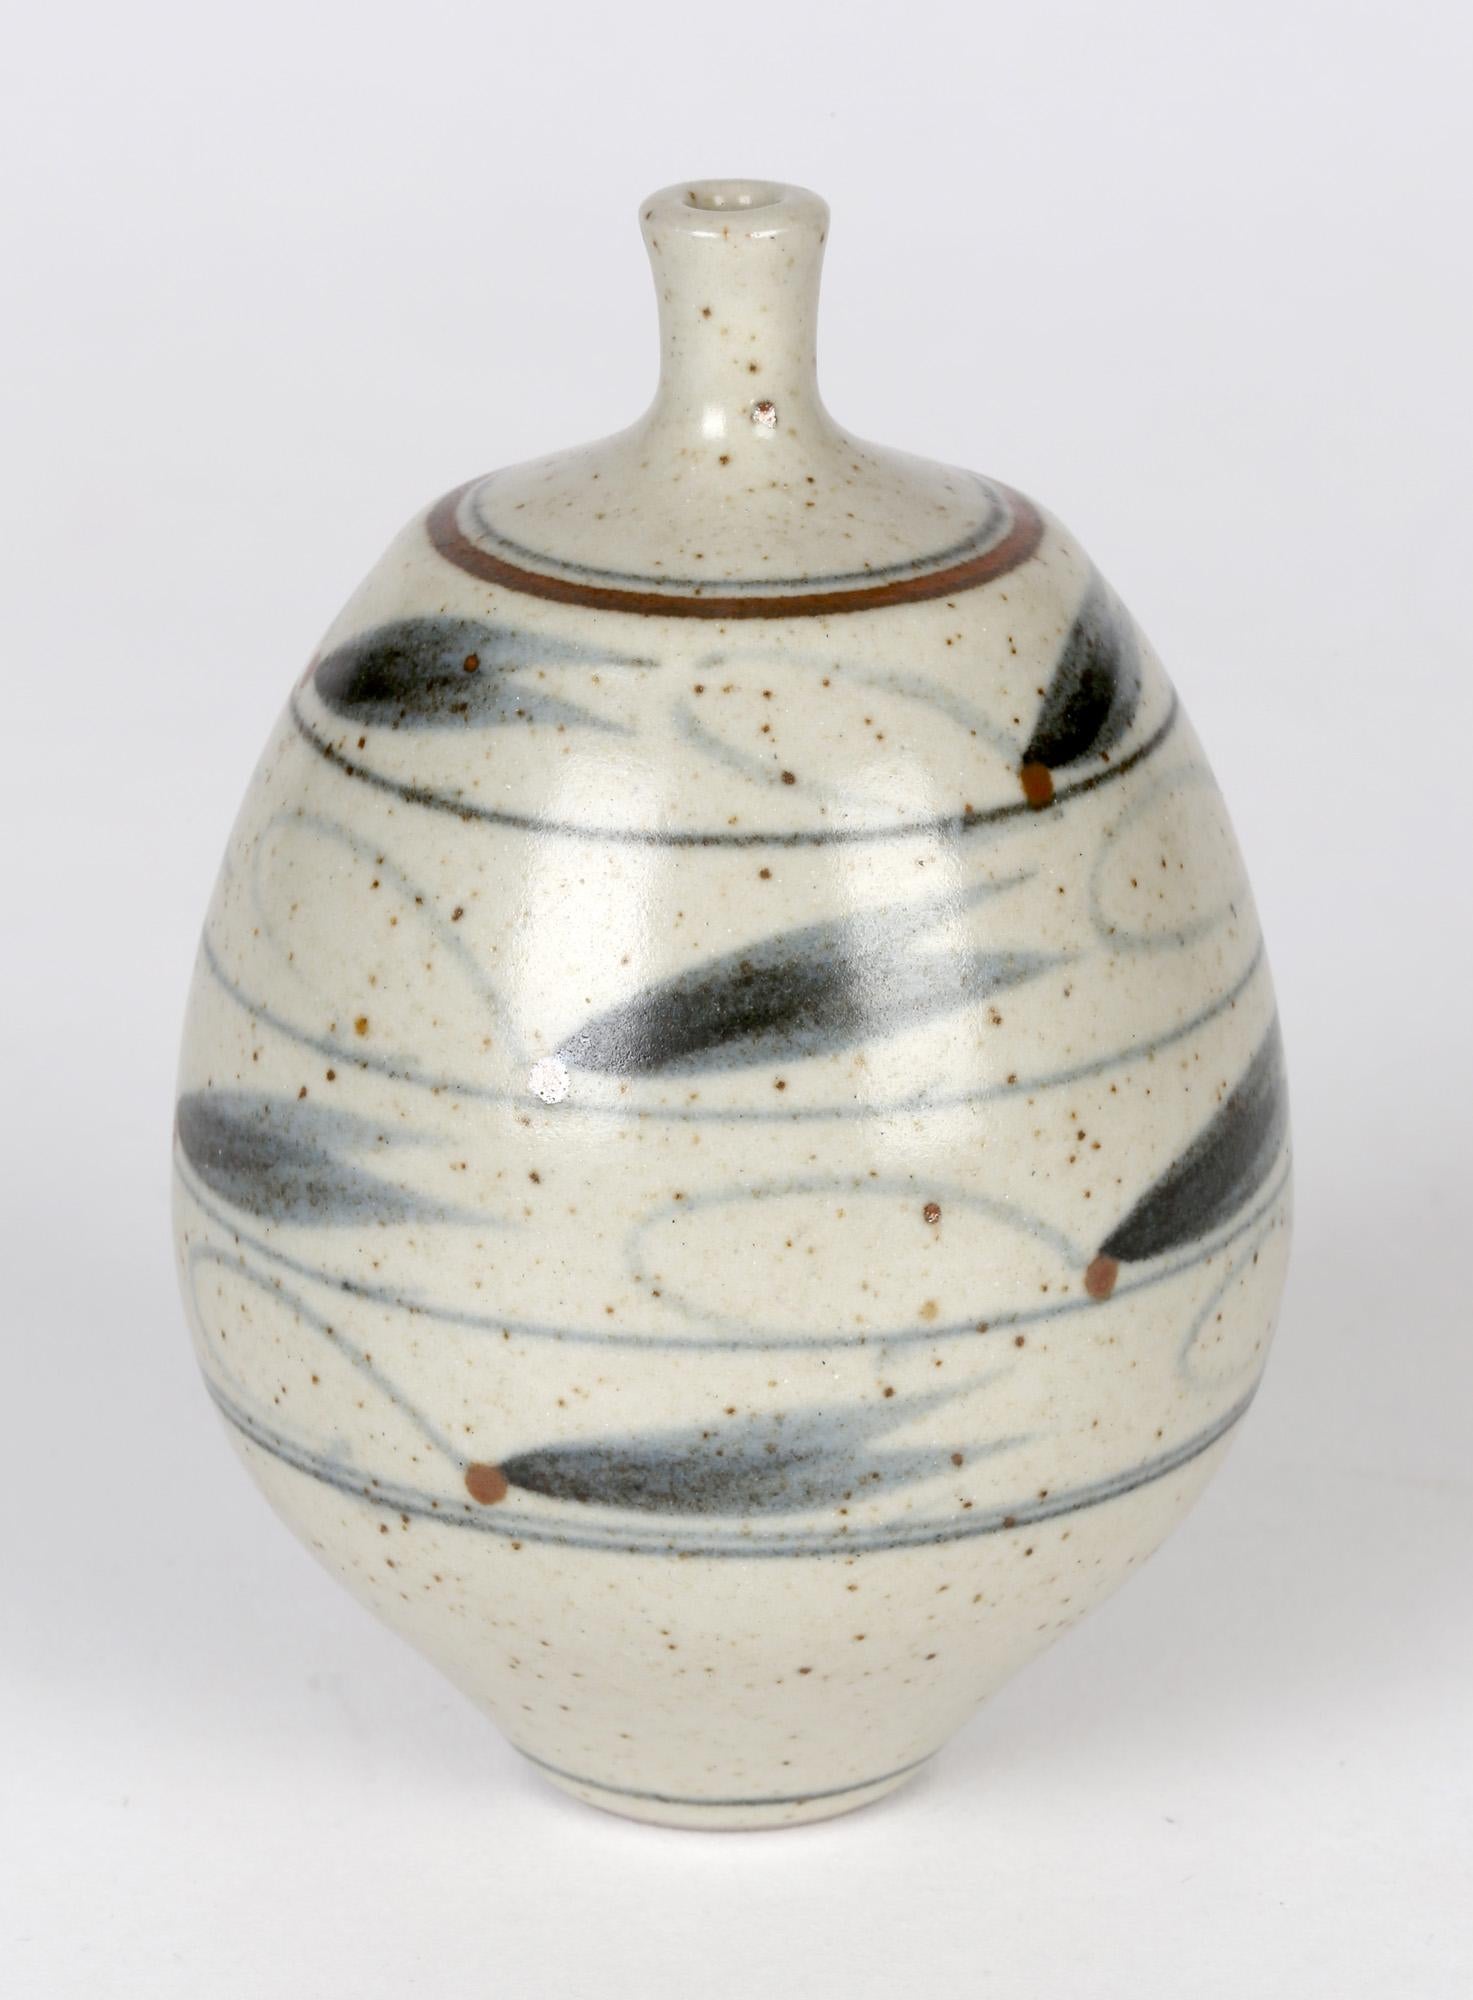 A good and finely made studio pottery stoneware bottle vase of small size decorated with a repeat brush pattern of stylized insect like designs by Derek Clarkson (1928-2013). The vase of rounded bulbous shape stands on a narrow flat rounded foot